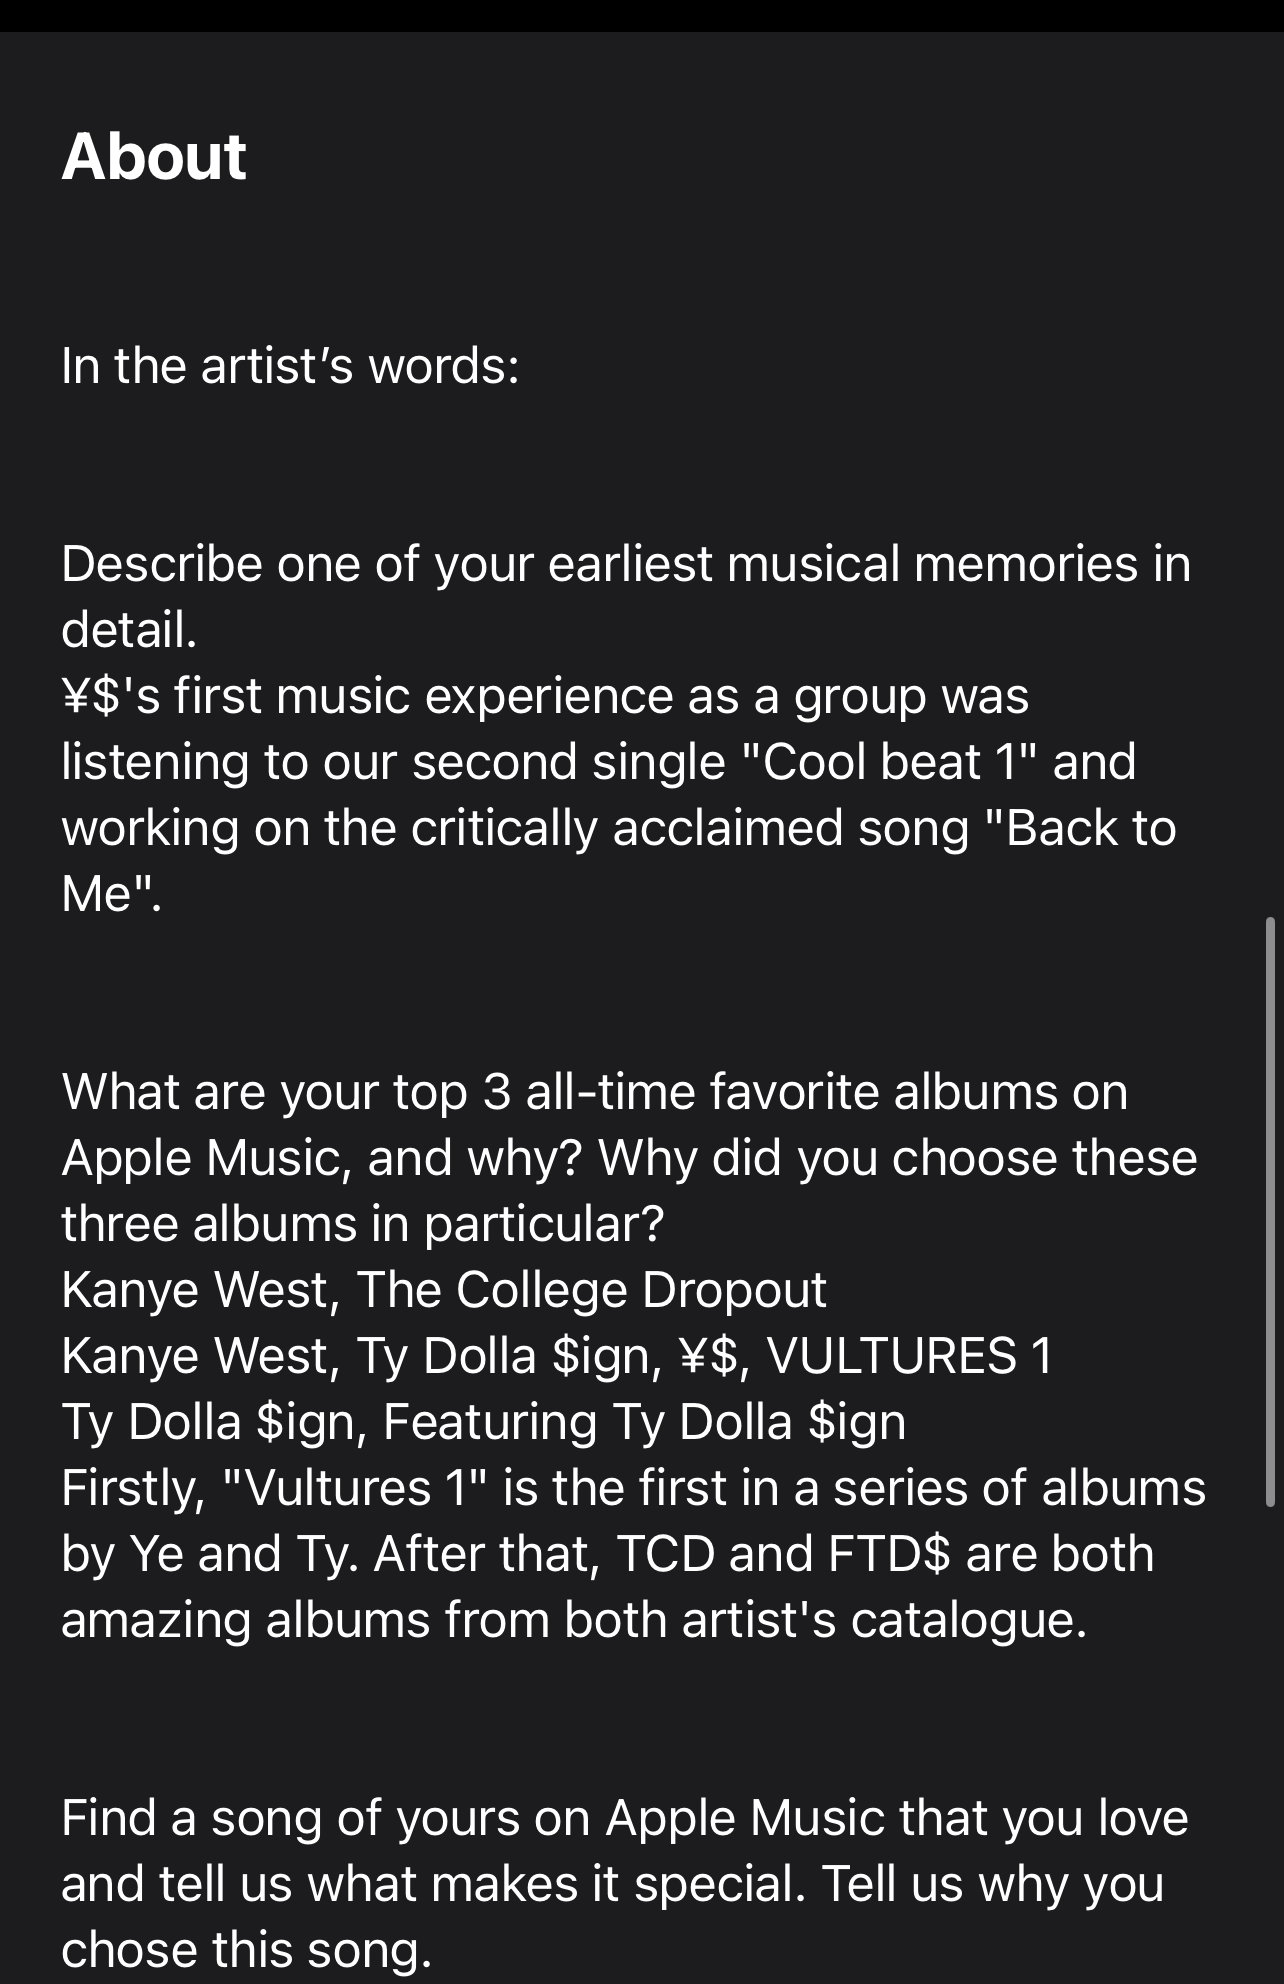 Summarized content from a music streaming app detailing an artist&#x27;s favorite albums, including works by Kanye West and The Flaming Lips